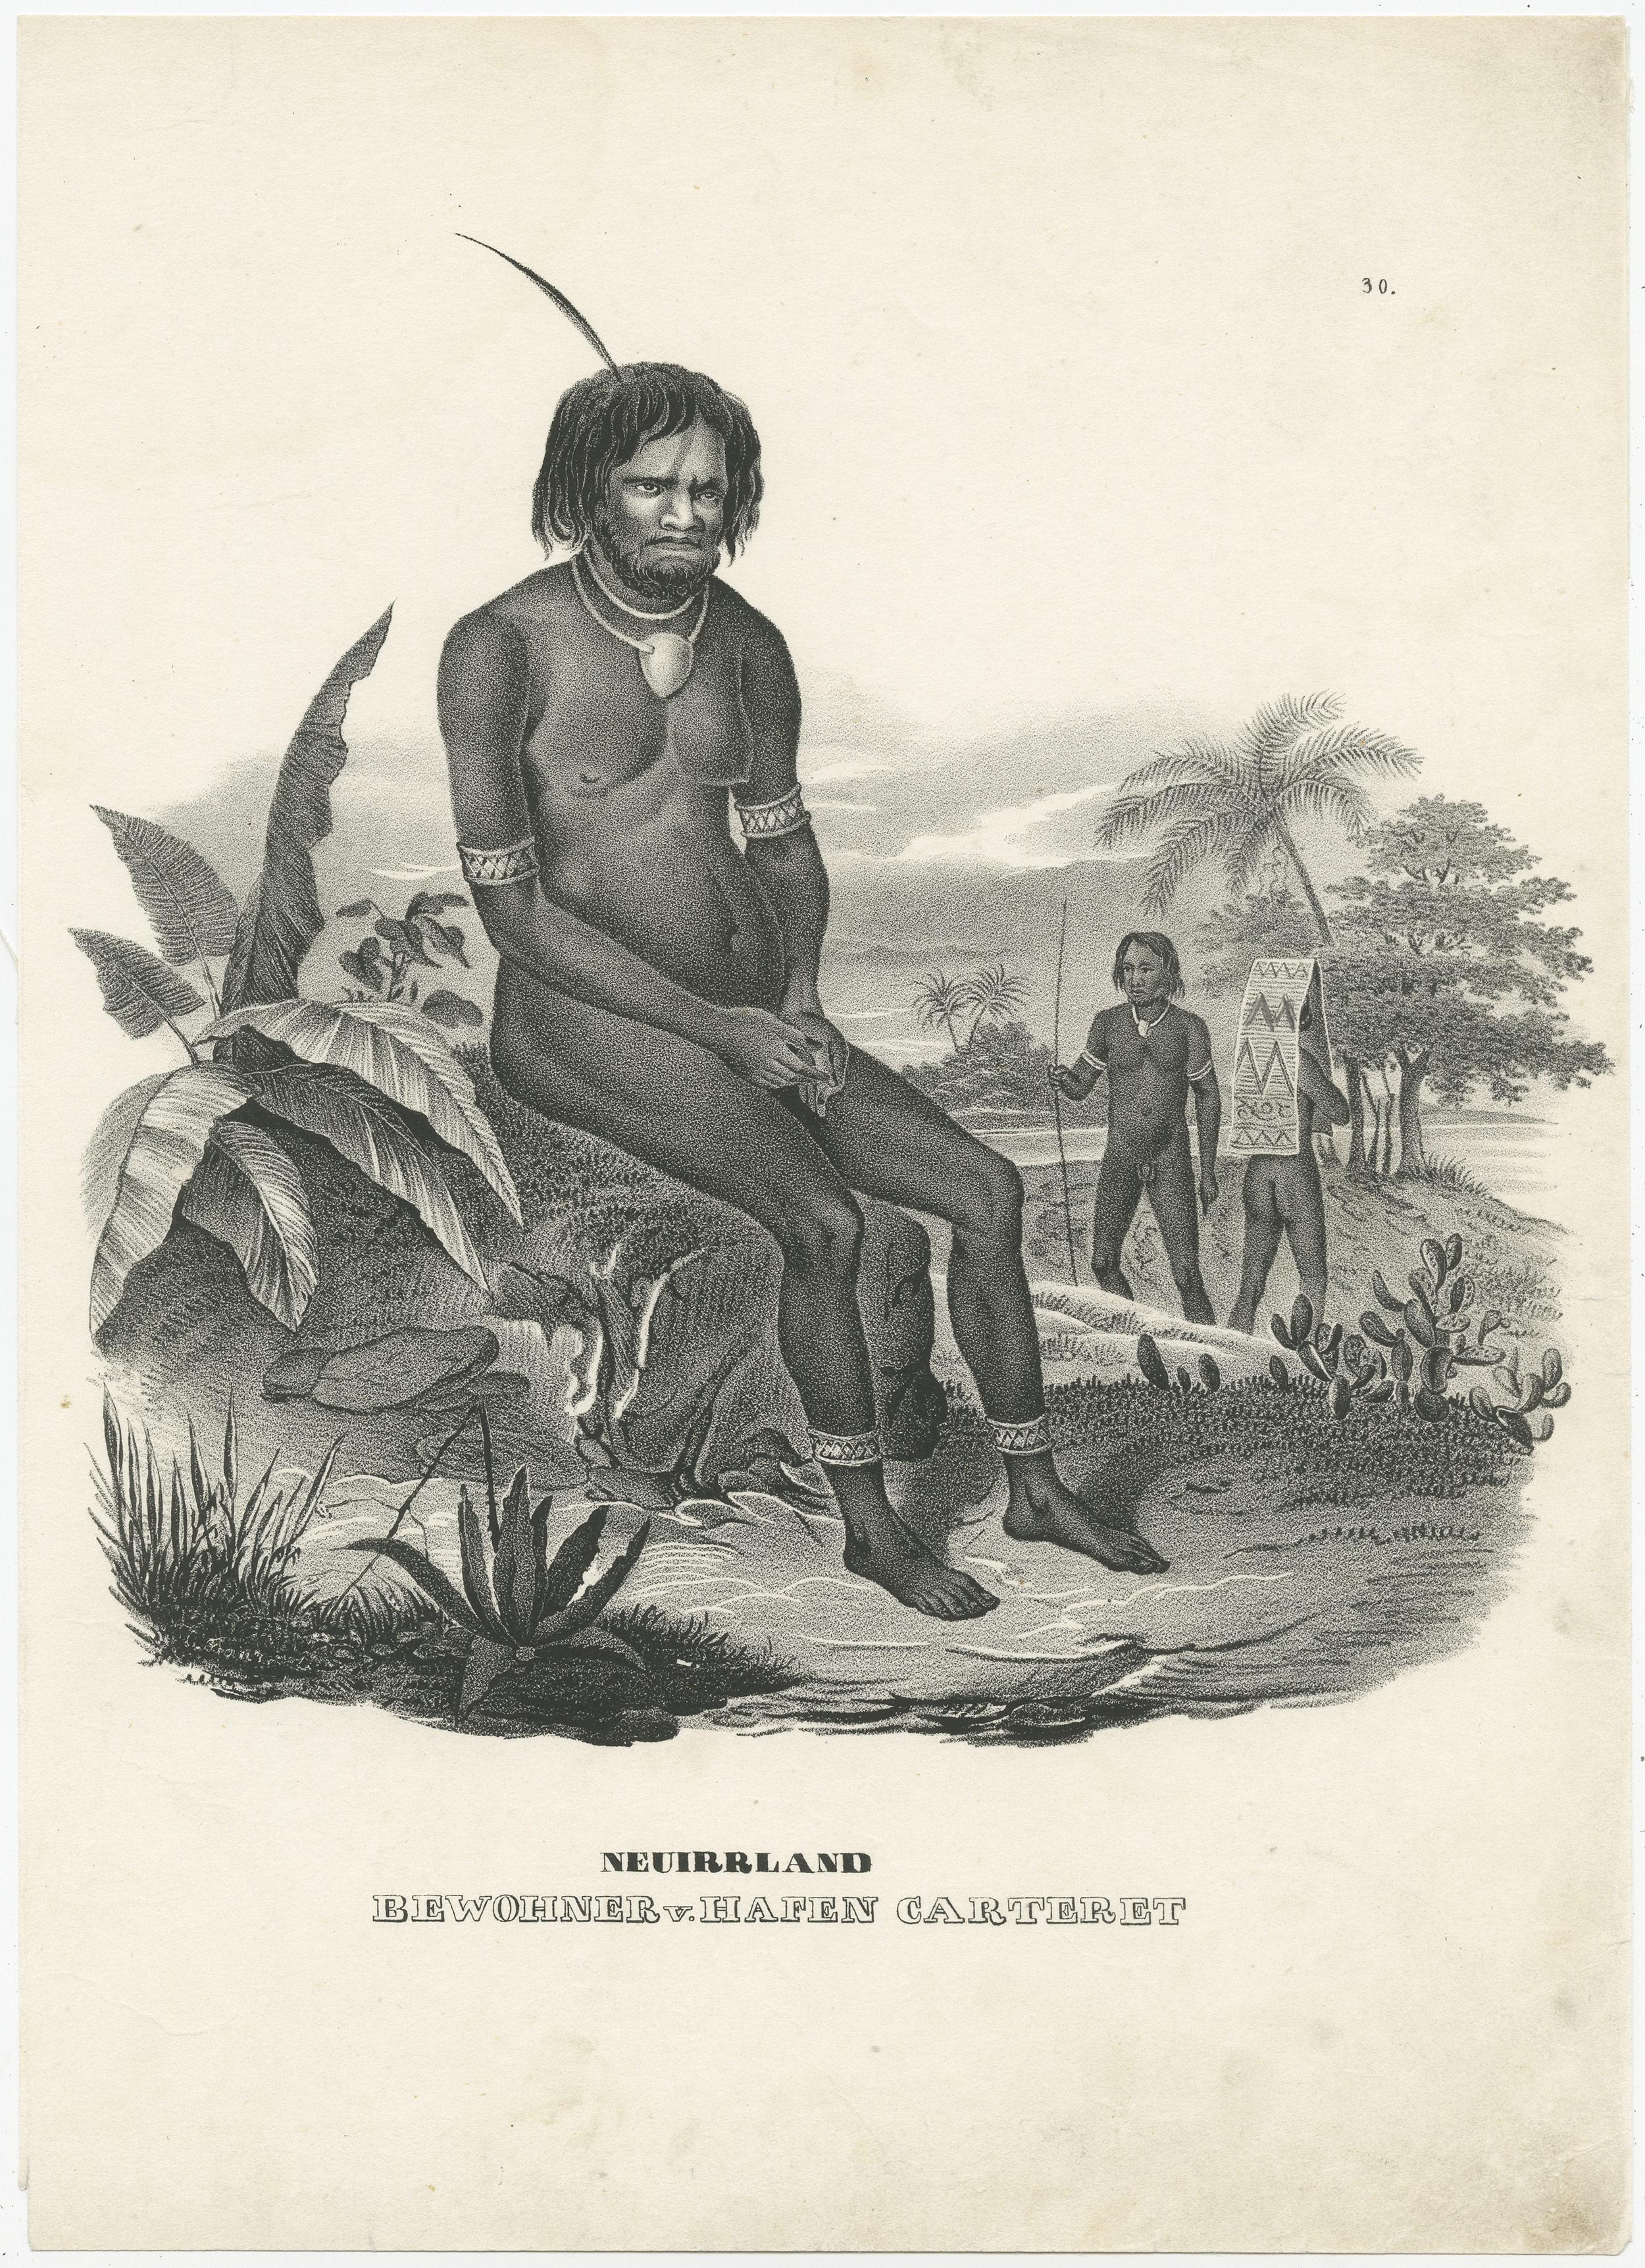 Antique print titled 'Neuirrland, Bewohner v. Hafen Carteret'. Male native of the Bismarck Archipelago, seated on an overgrown rock, two fellow tribesmen on the right, one with a plaited mat over his head. The port of Carteret was on the southern